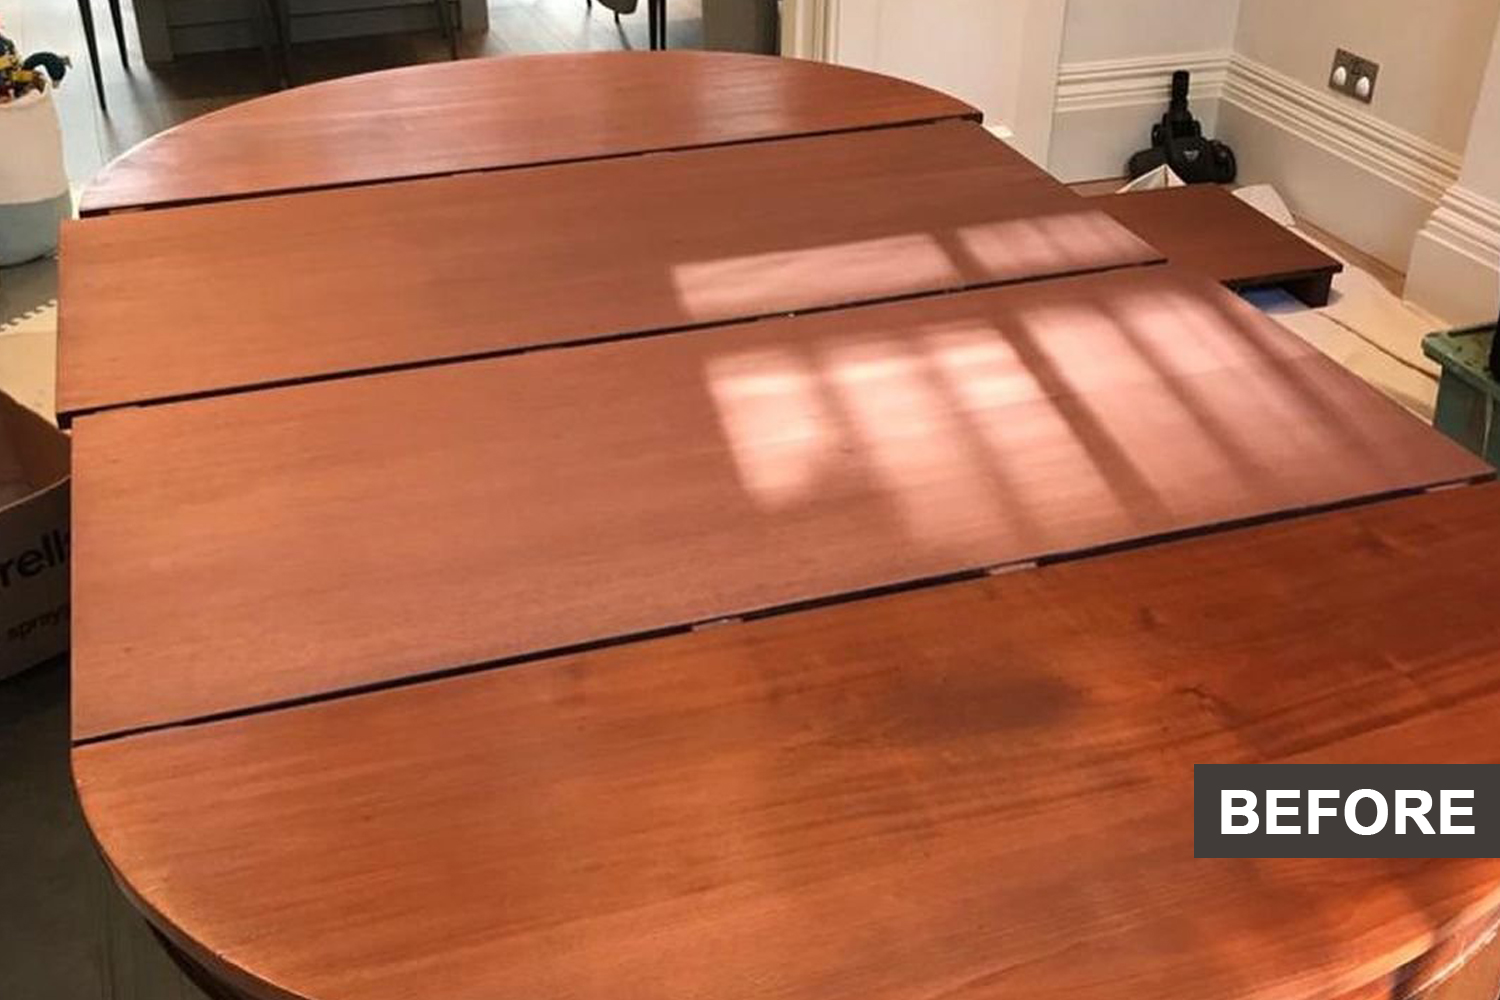 Before polishing wooden dining table.